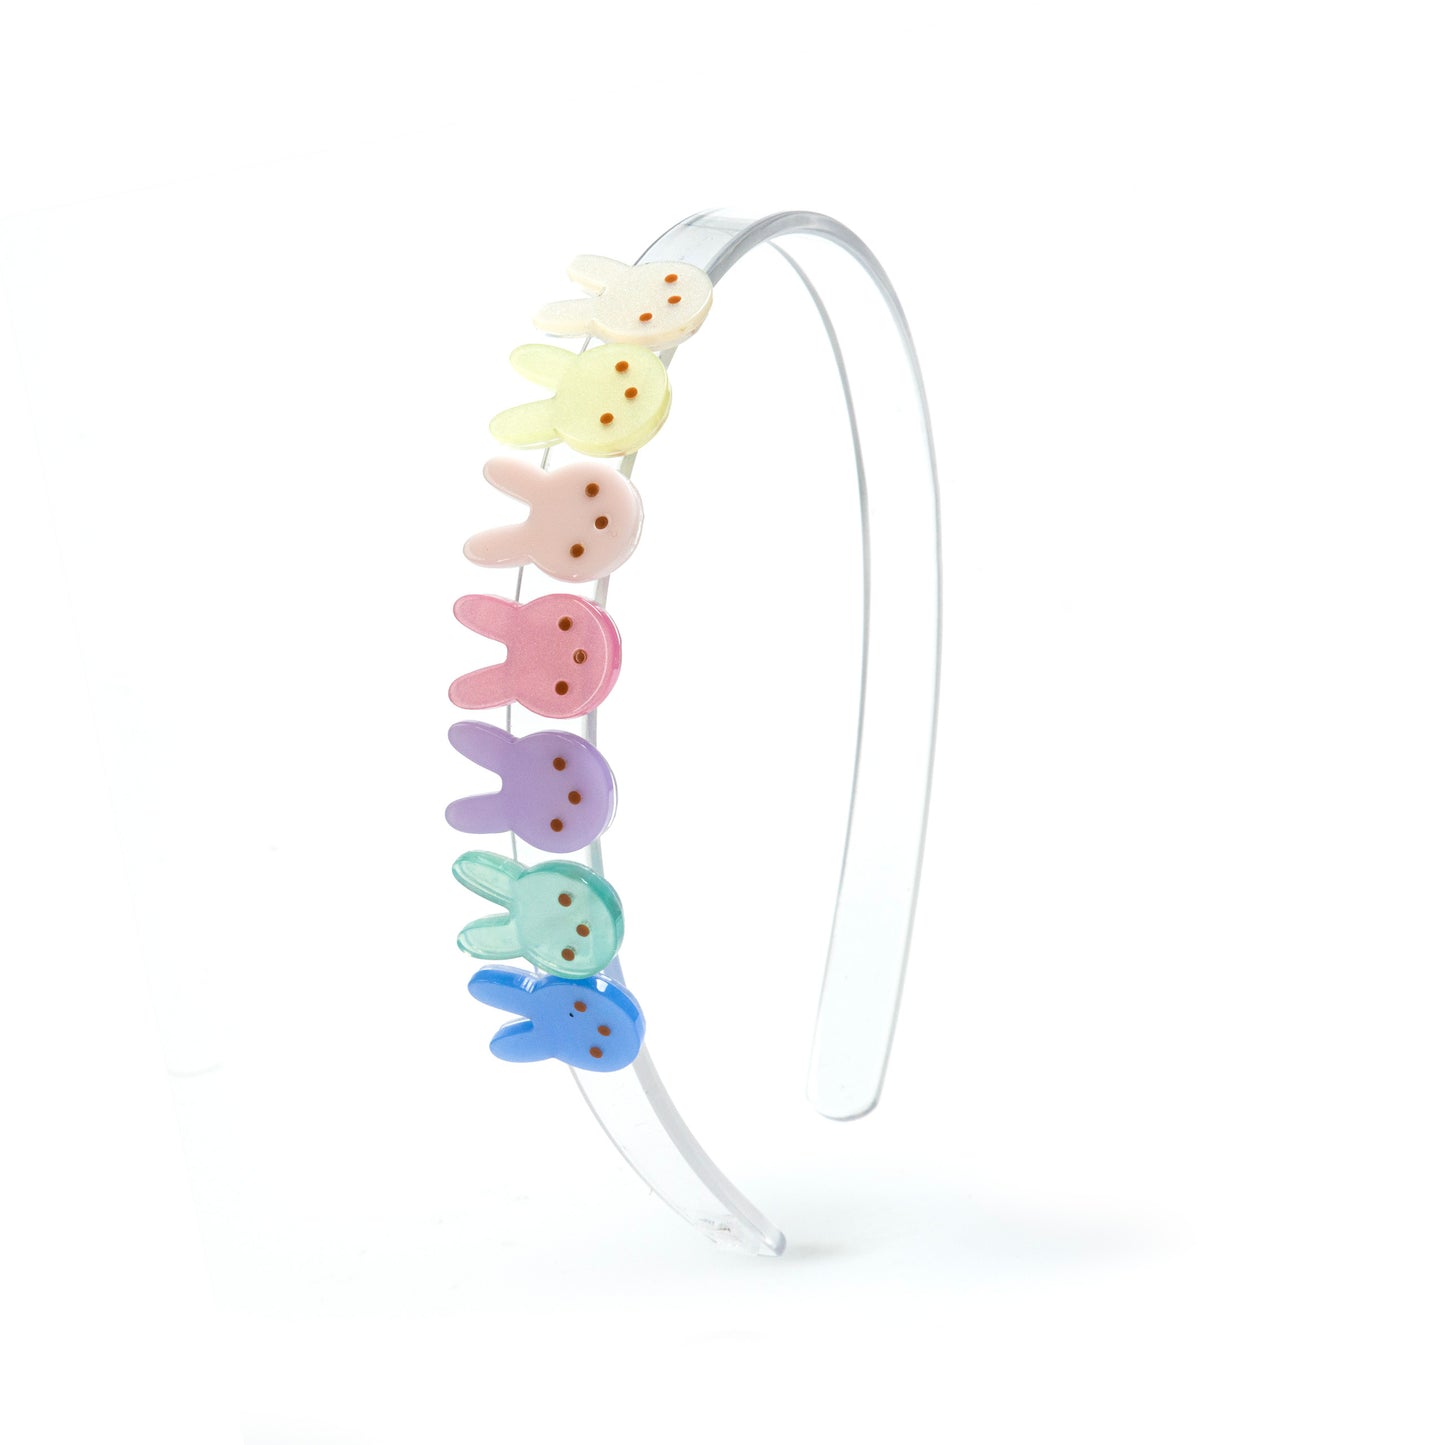 Clear acrylic headband adorned with seven colorful pastel shades bunny faces.